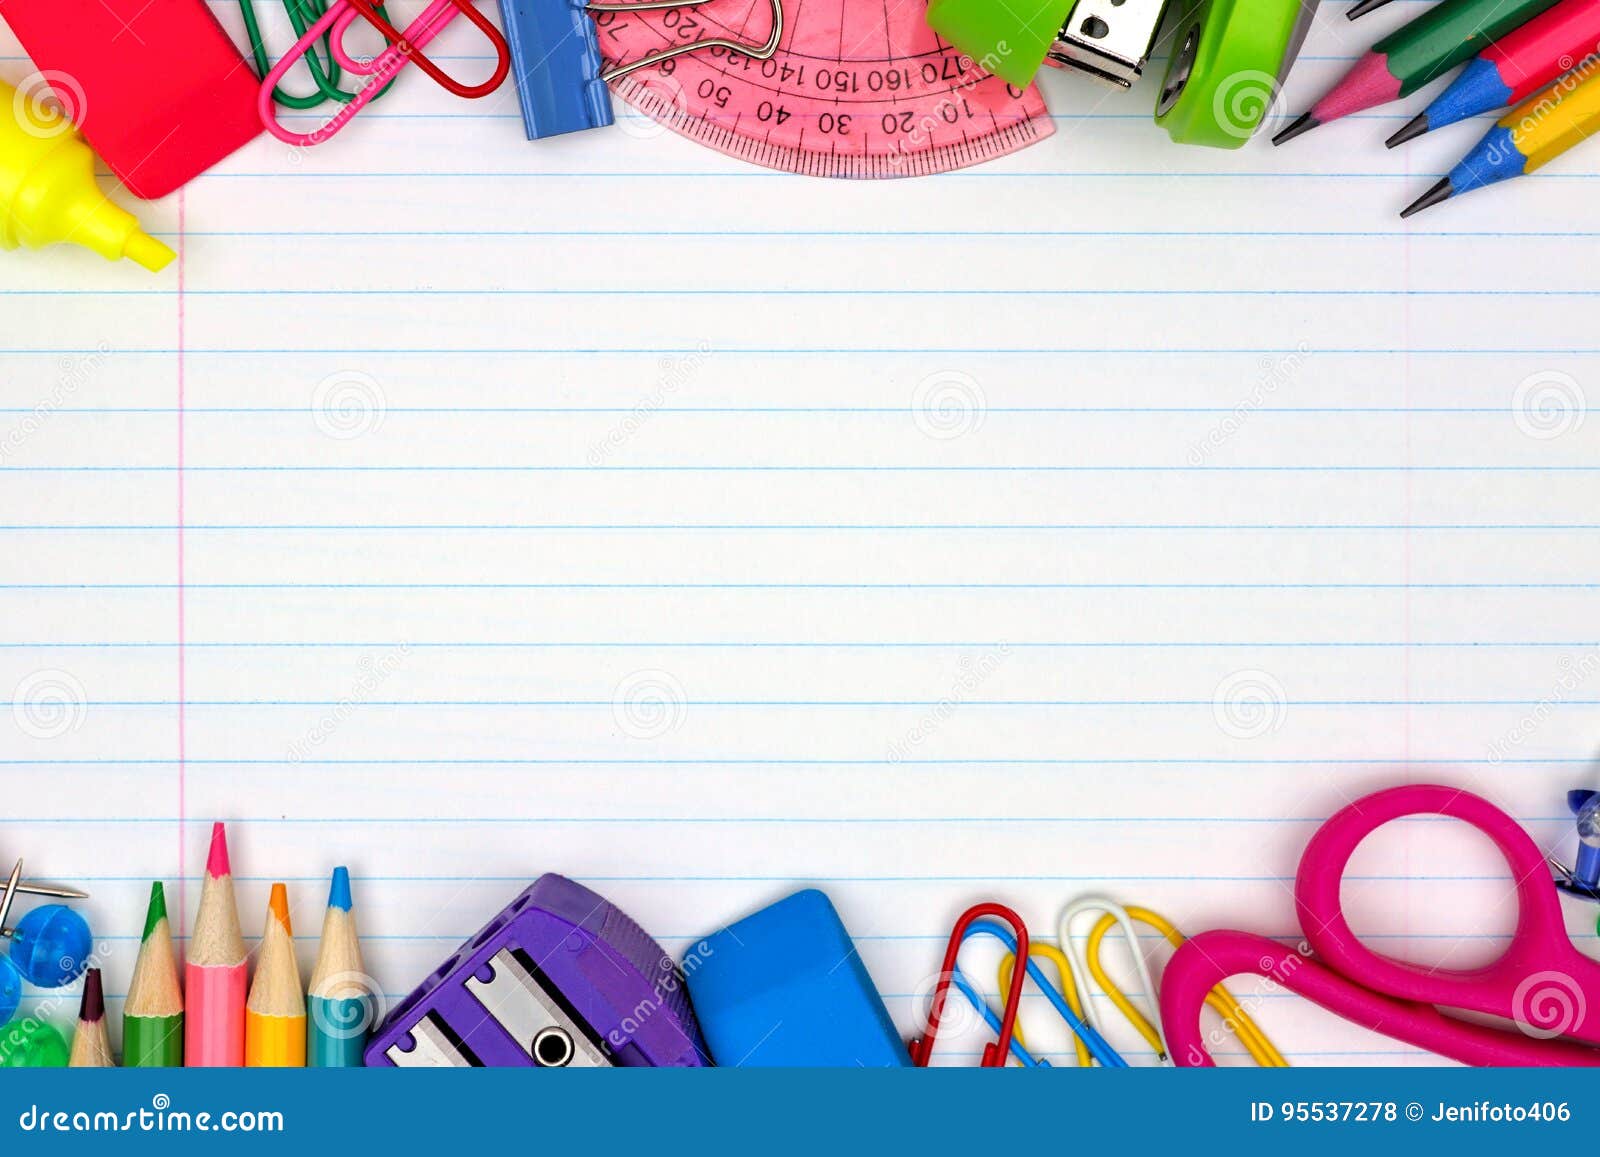 school supplies double border on lined paper background